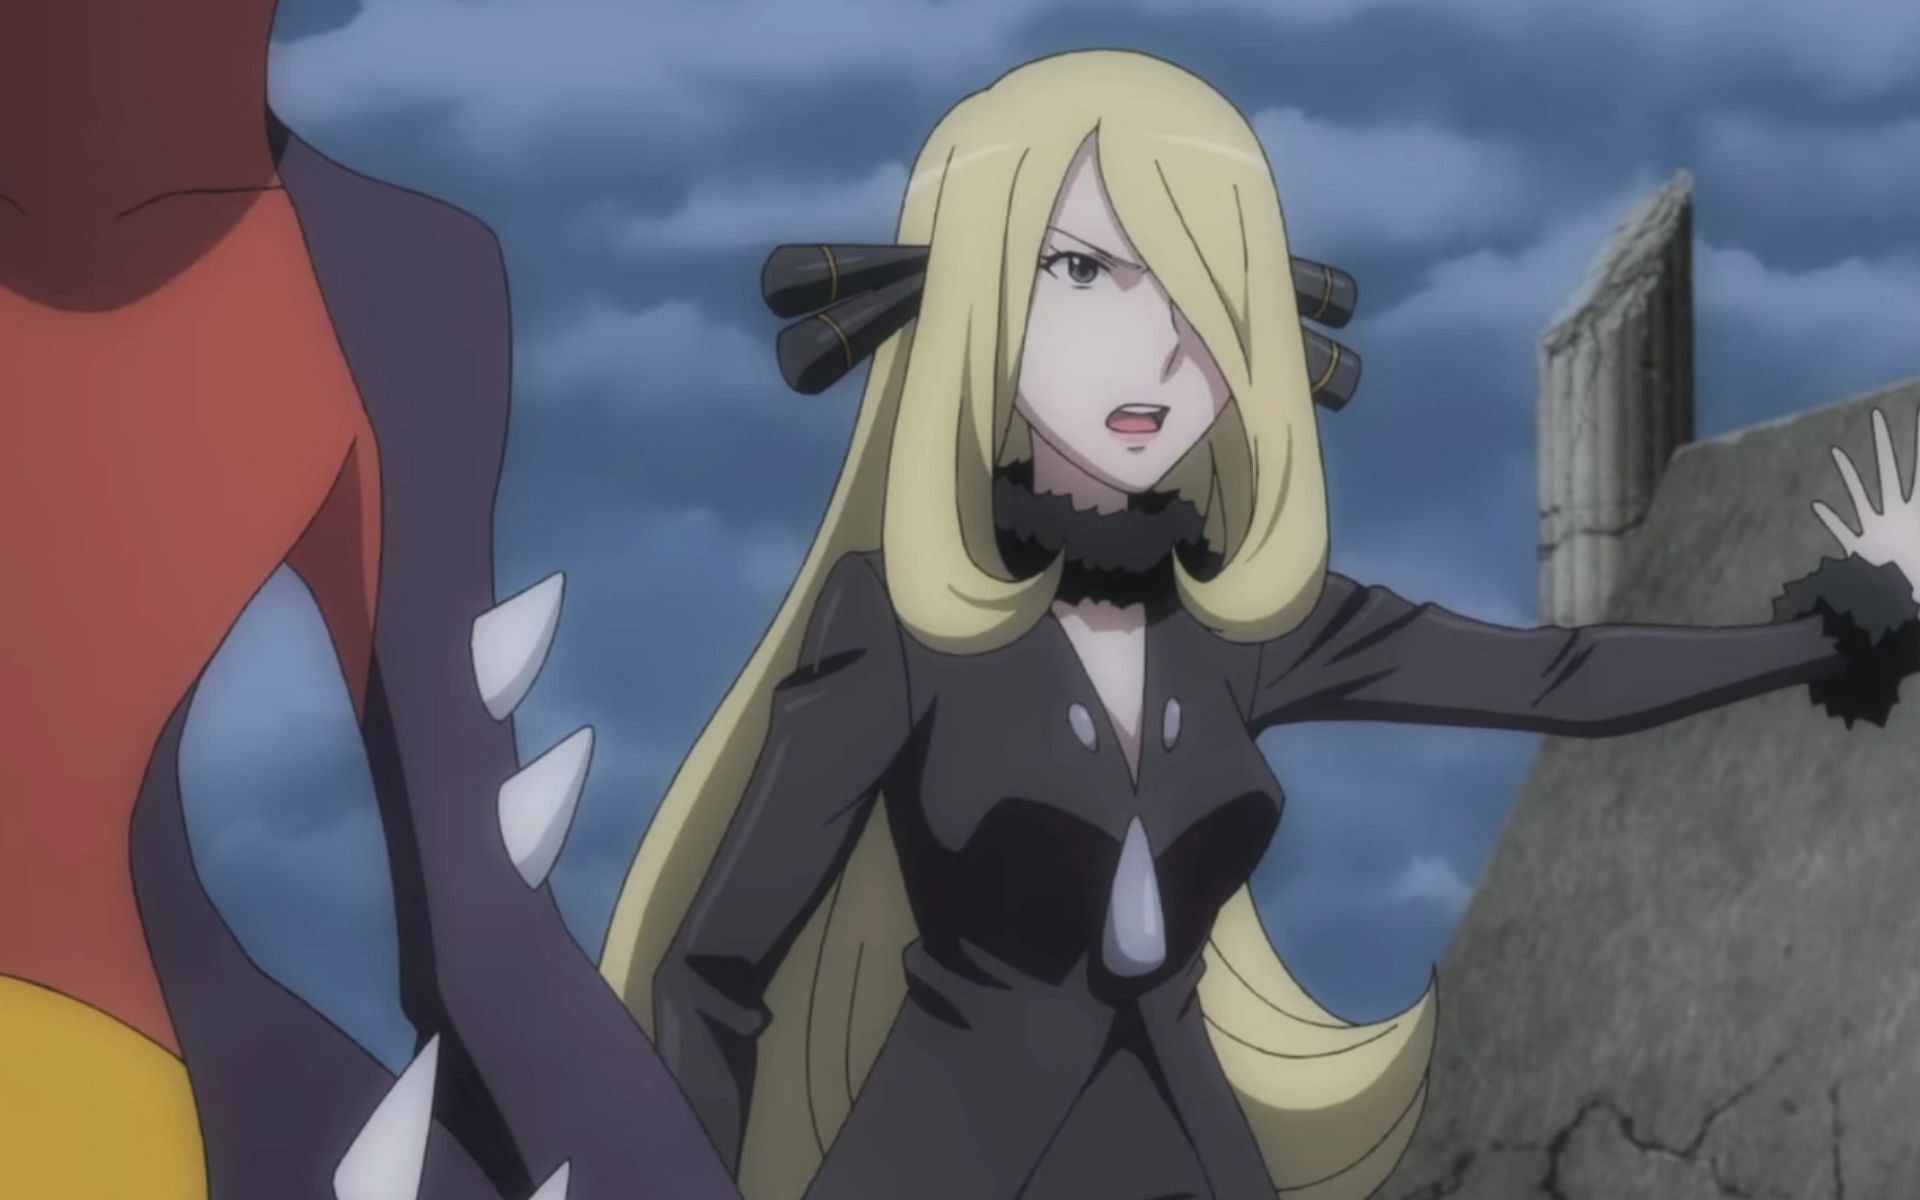 Cynthia, as she appears in Pokemon Generations, a spin-off anime series (Image via OLM, Inc)